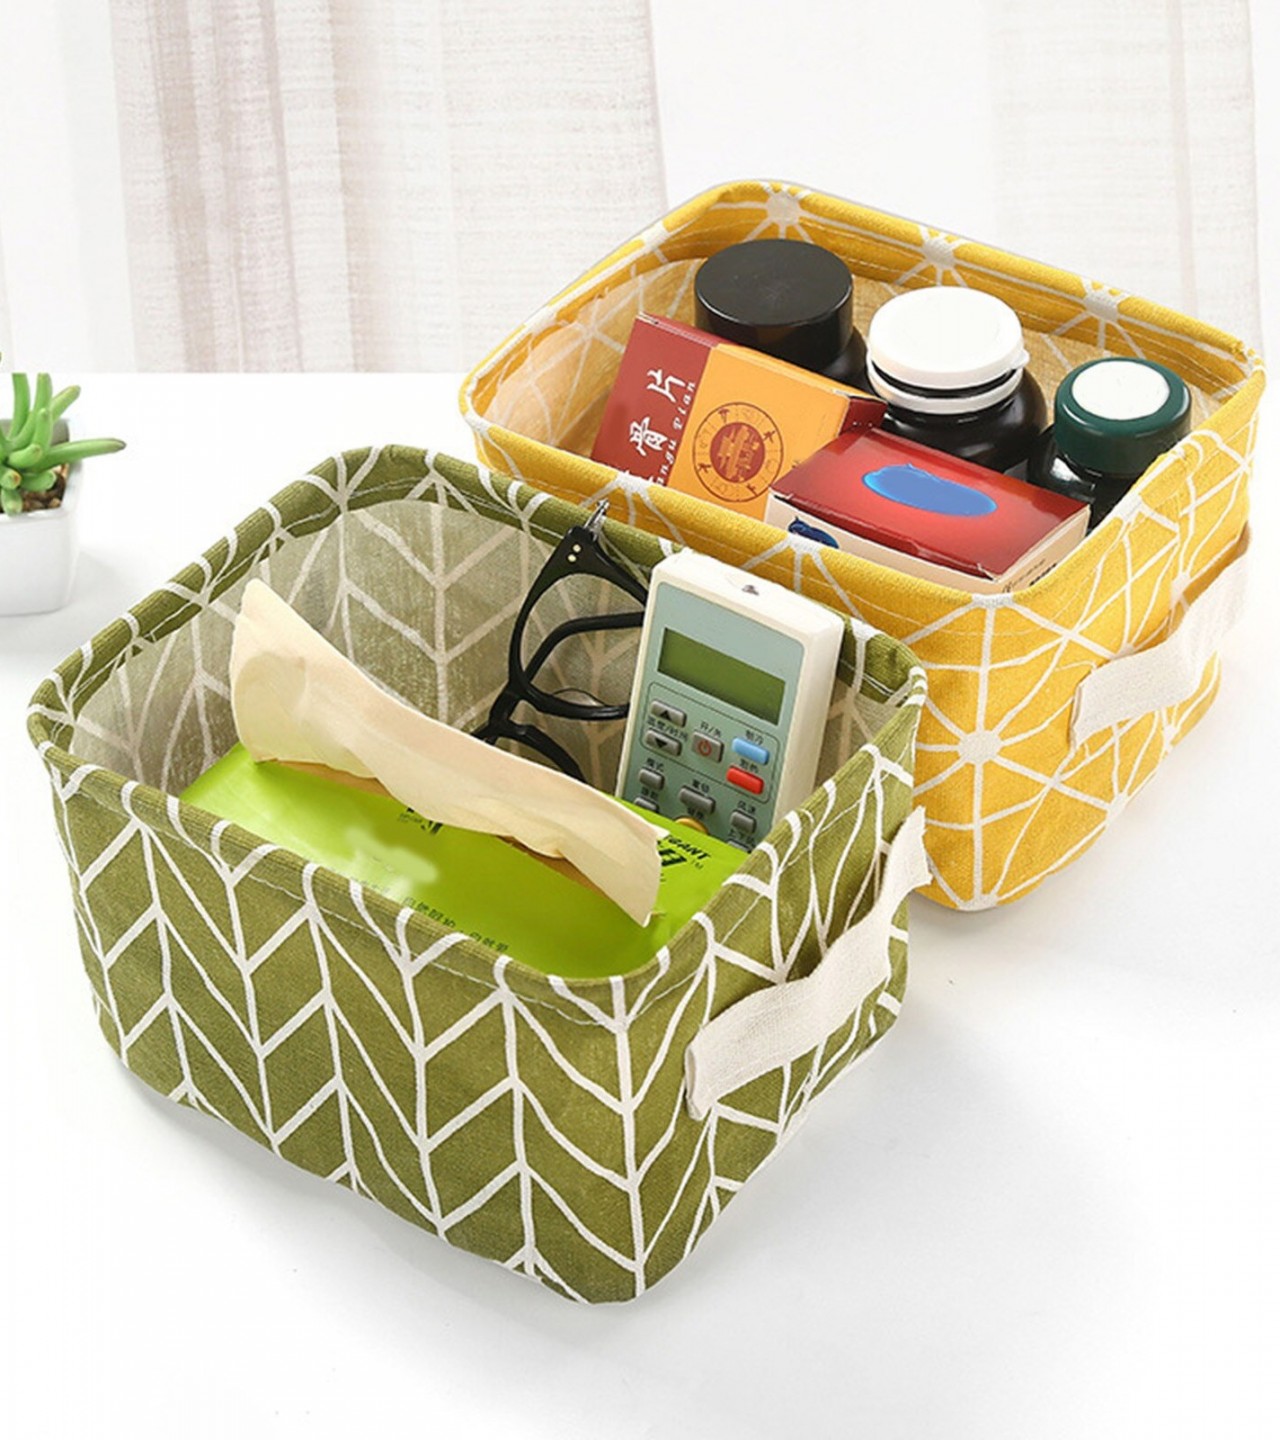 1Pcs Multipurpose Using Waterproof Folding Storage Box Basket With Handle Grip for Toys and Clothes